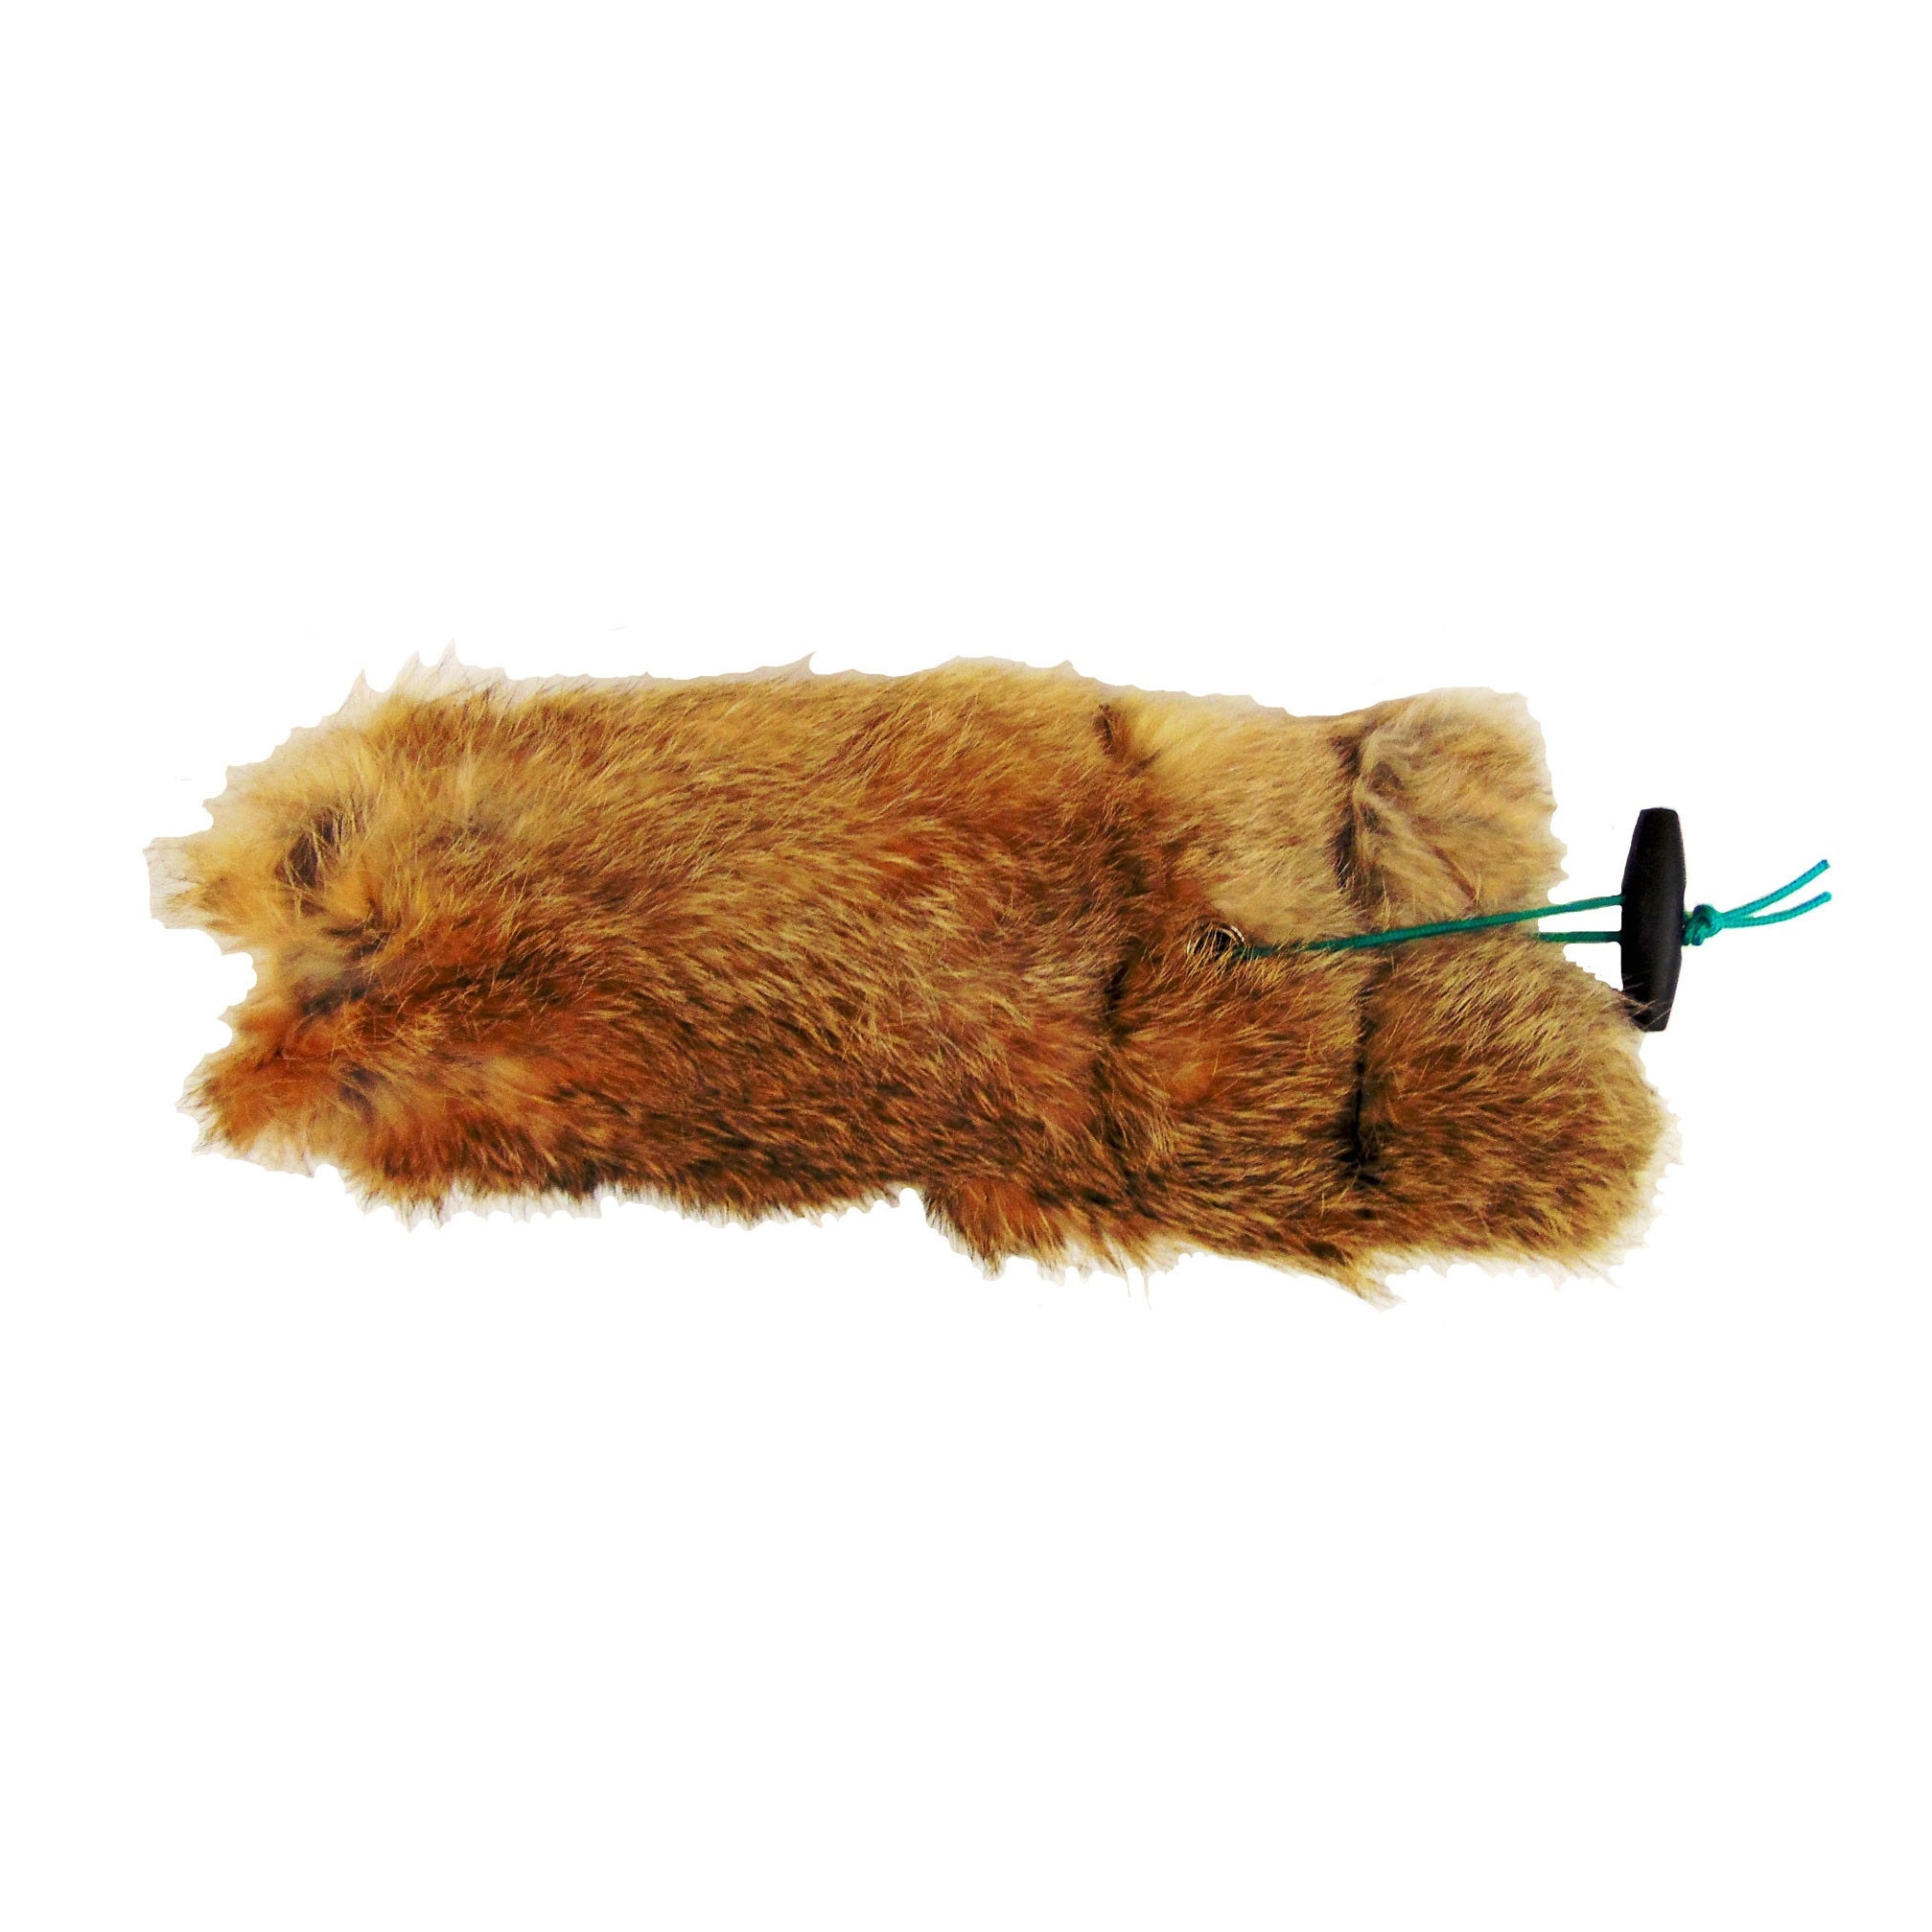 SPORTING SAINT 1/2 lb Rabbit Dummy With Throwing Toggle